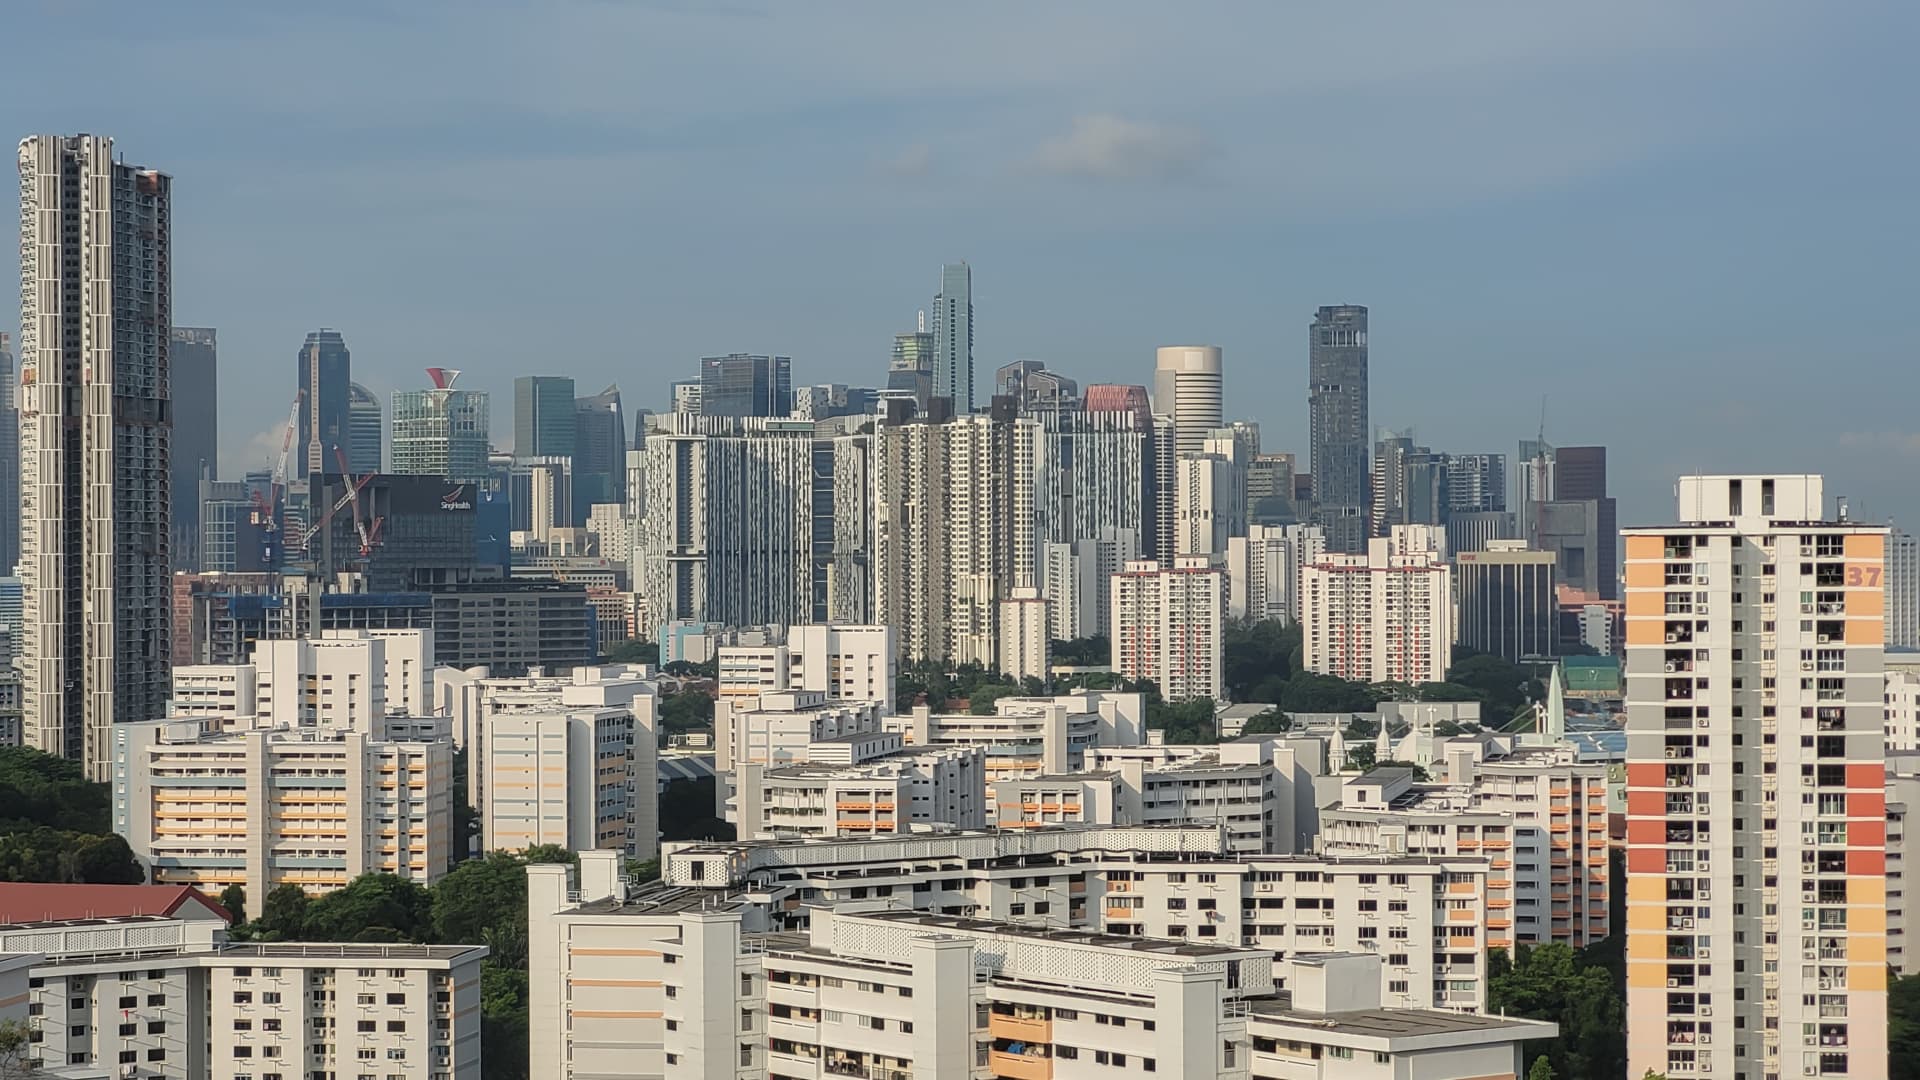 Homeowners in Singapore could soon feel pinch from rising mortgages